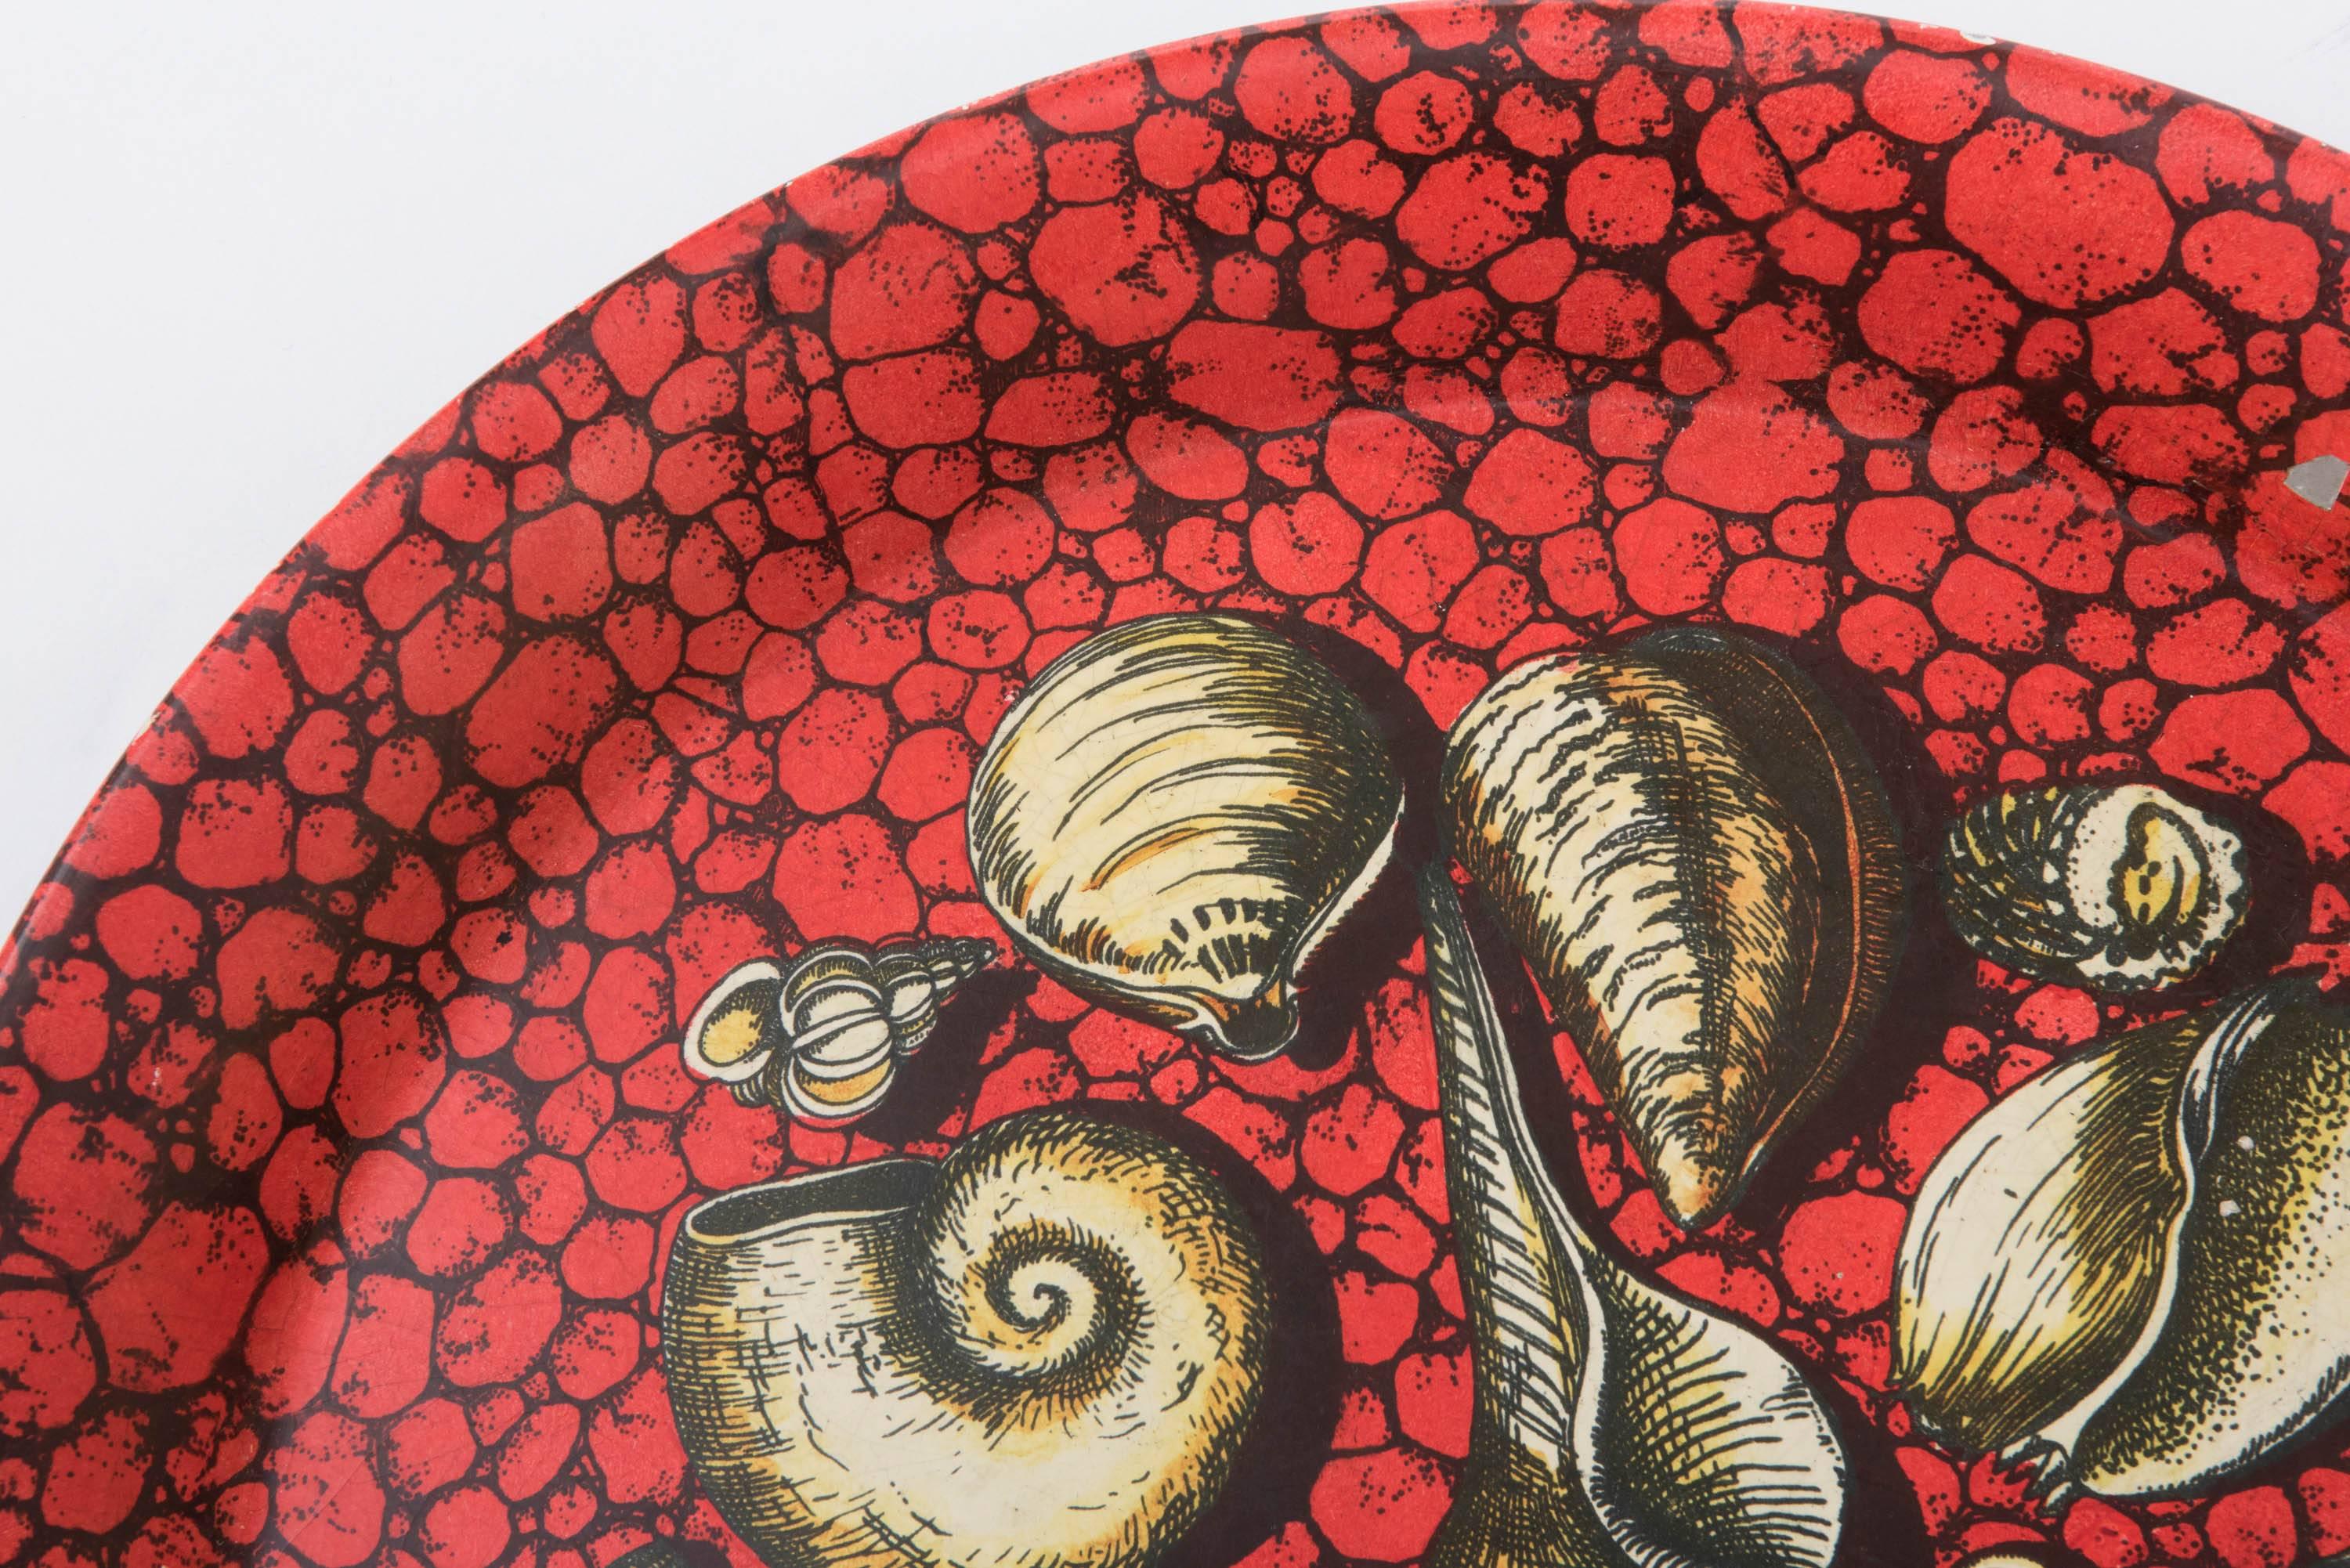 Mid-20th Century Piero Fornasetti metal serving tray lithographically printed, Italy circa 1950